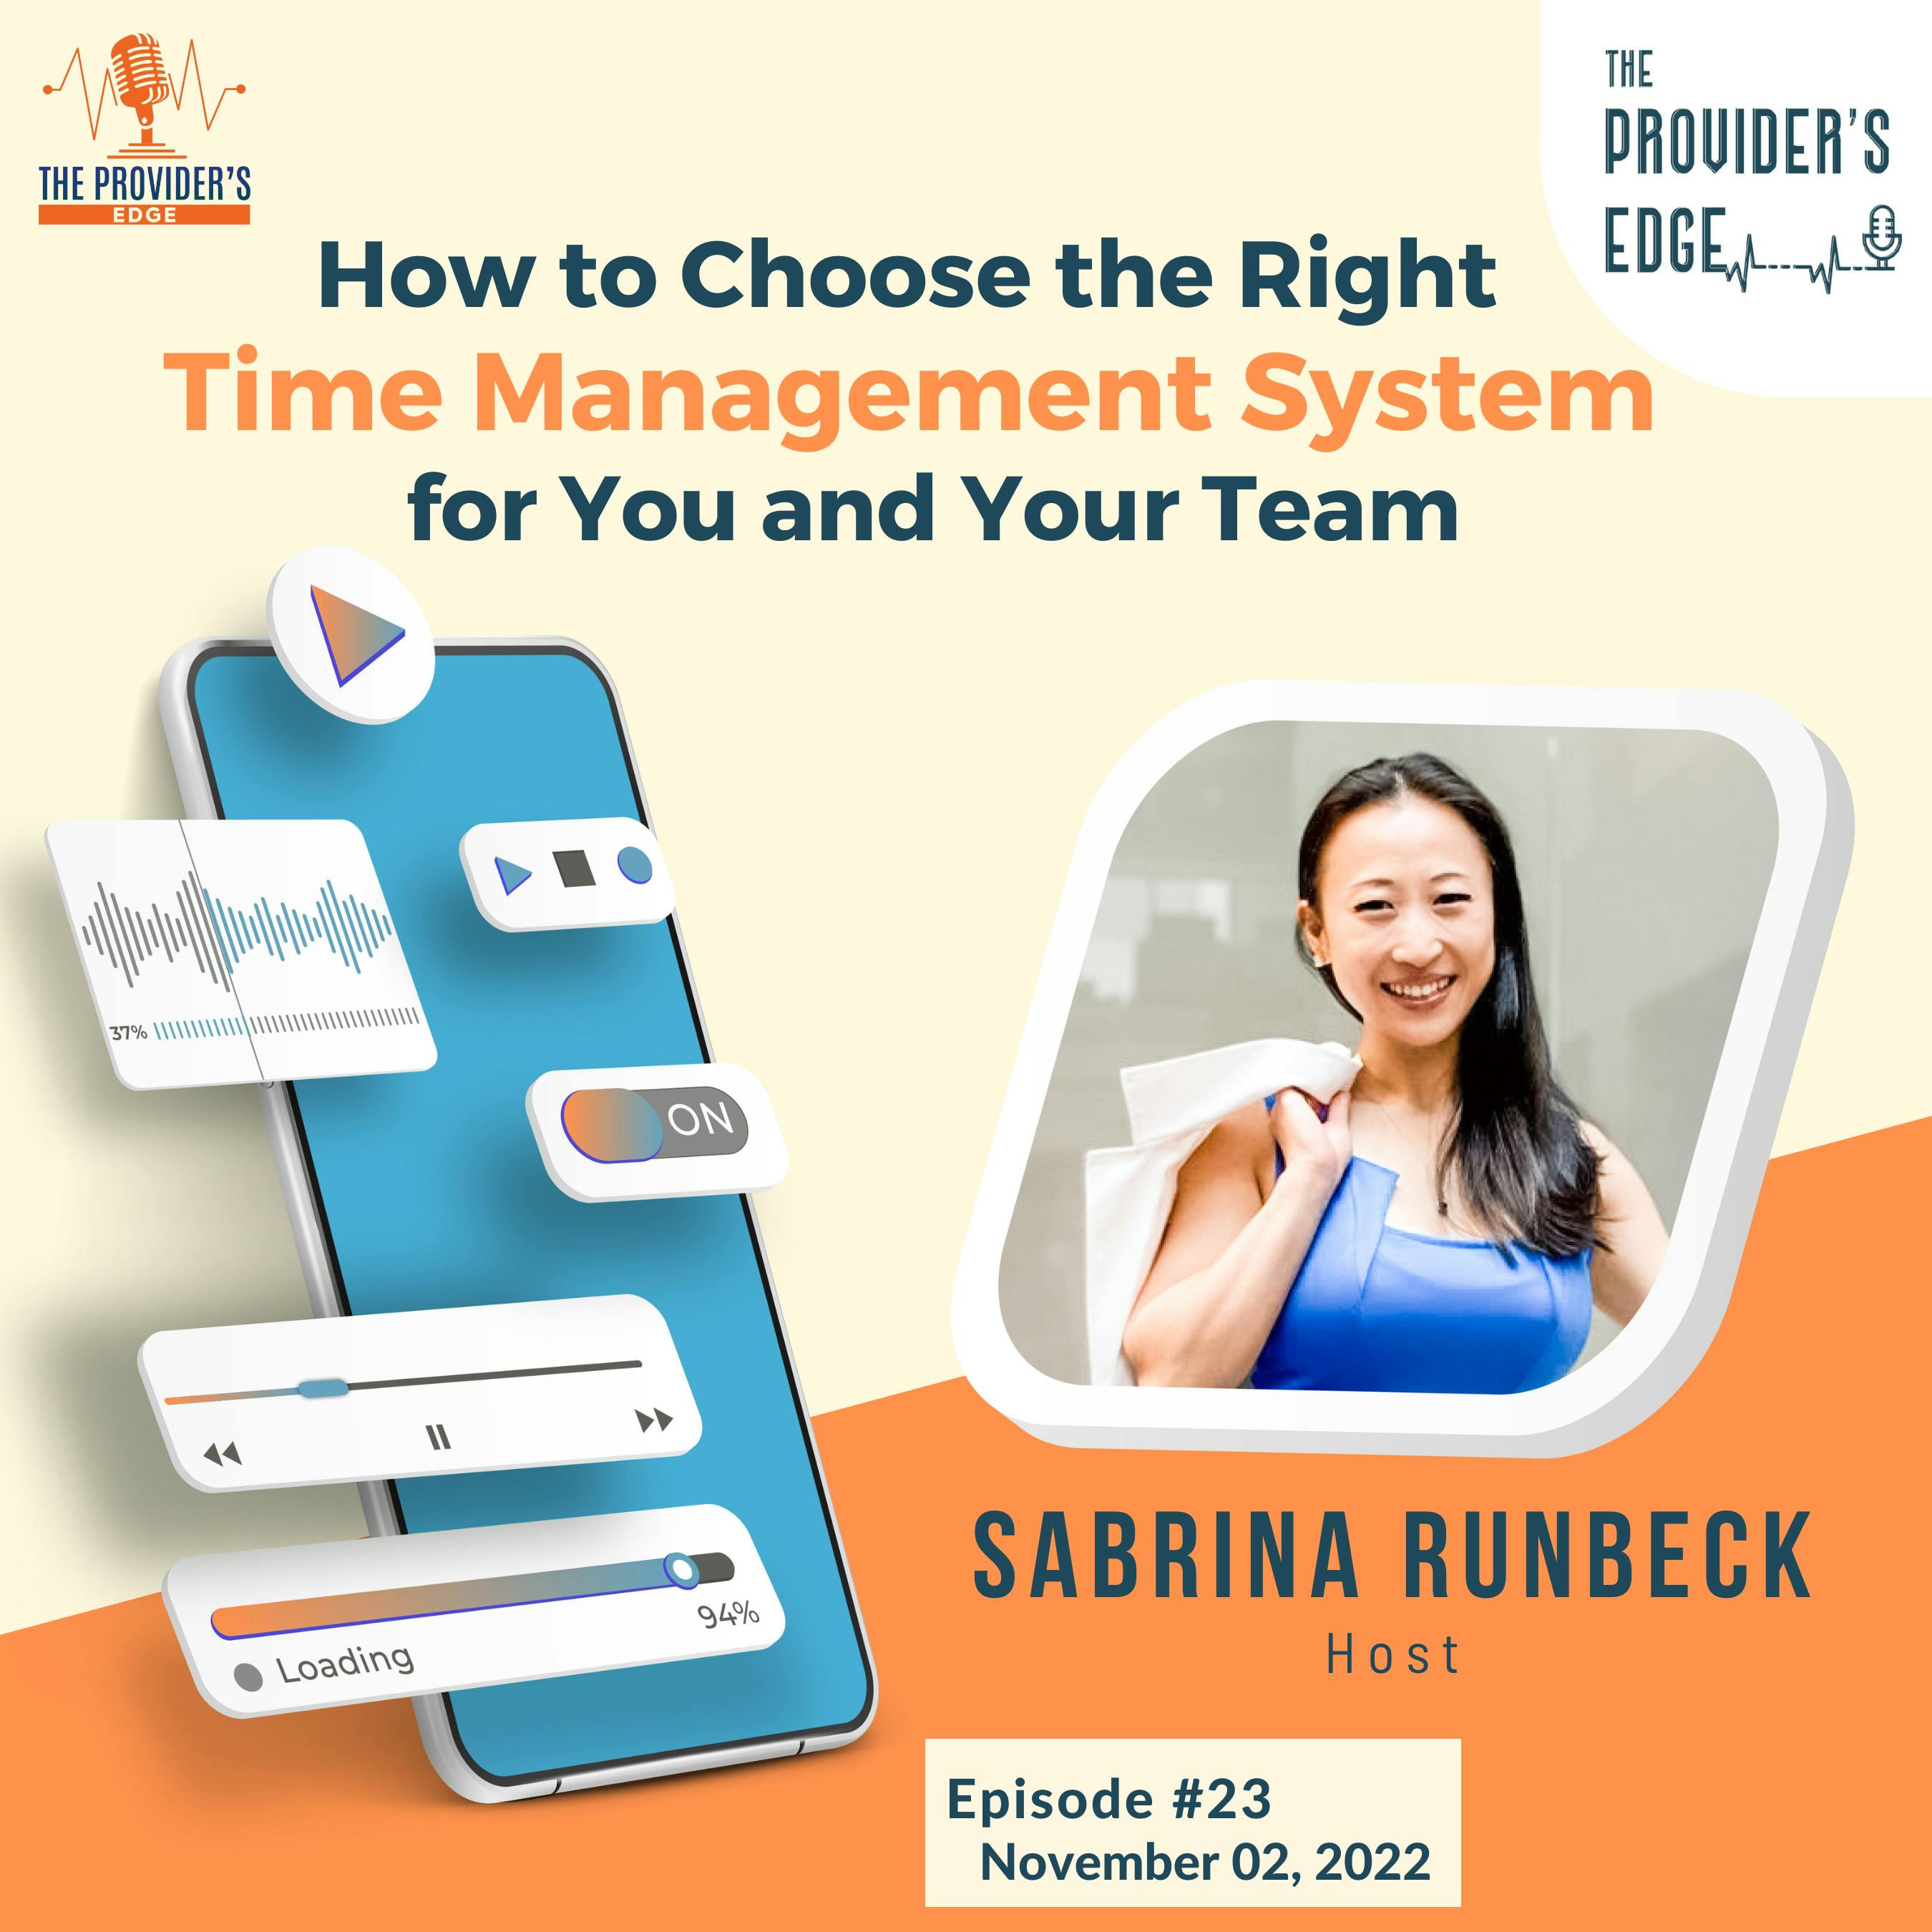 How to Choose the Right Time Management System for You and Your Team with Sabrina Runbeck